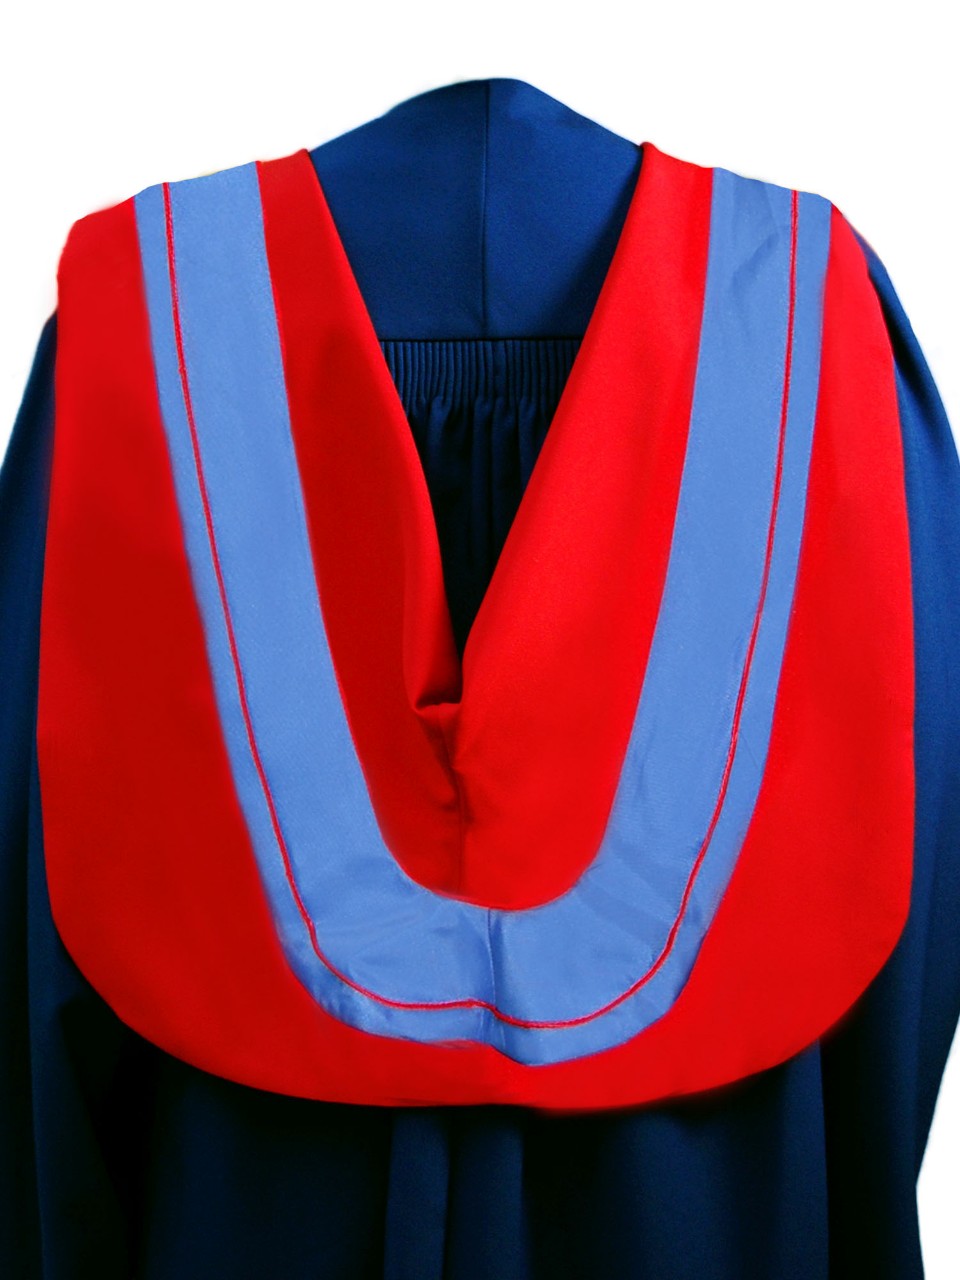 The Master of Arts hood is red with wide blue border and red cording